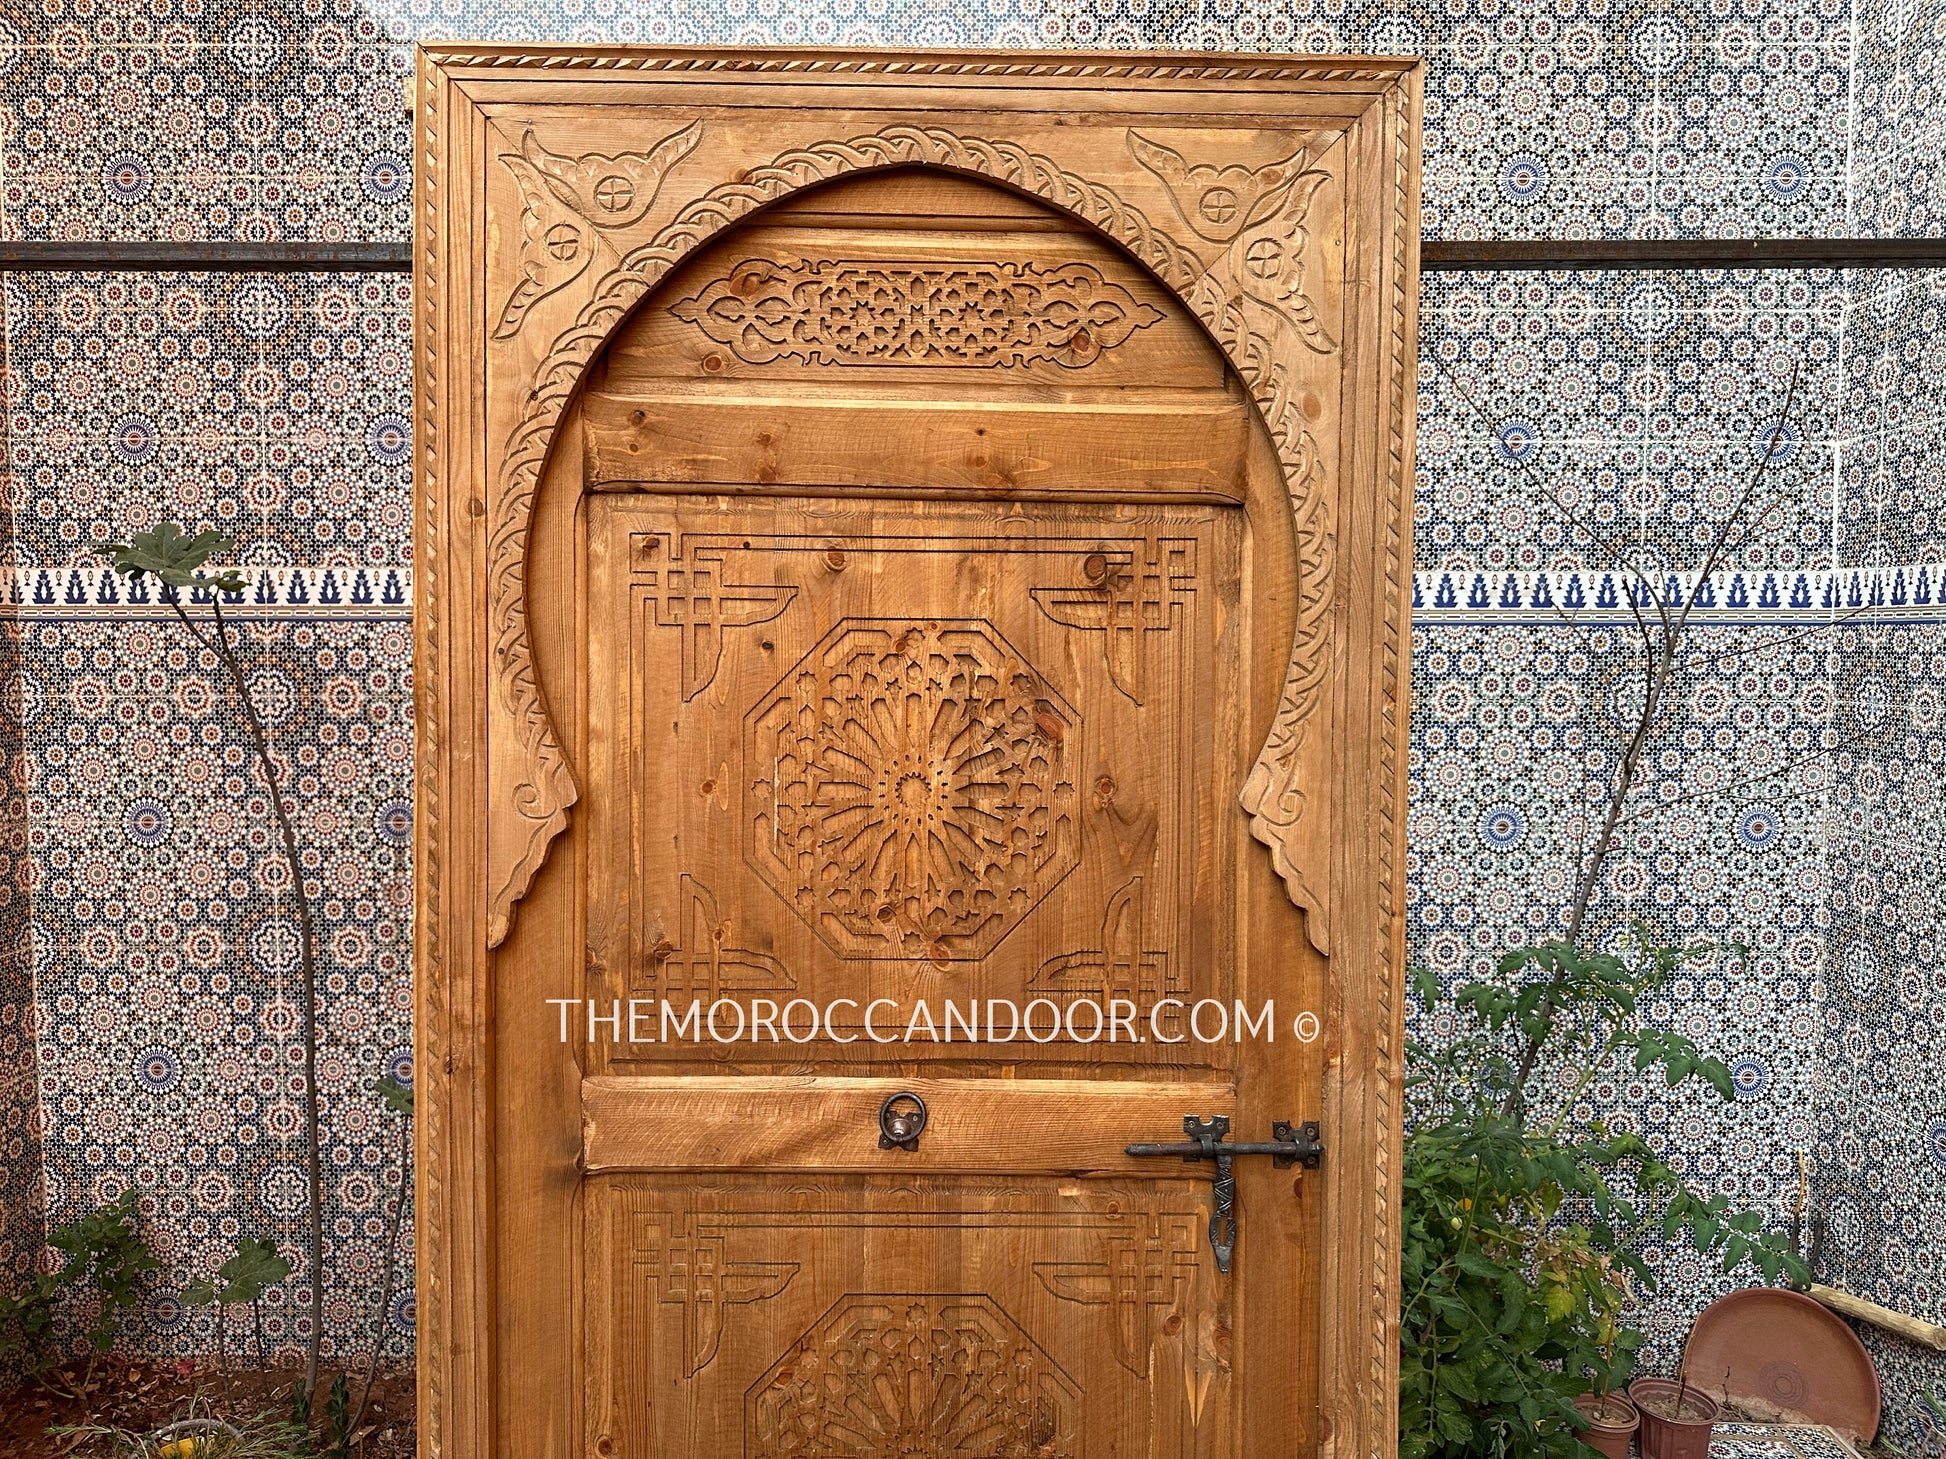 Artisan-crafted door featuring authentic Moroccan patterns